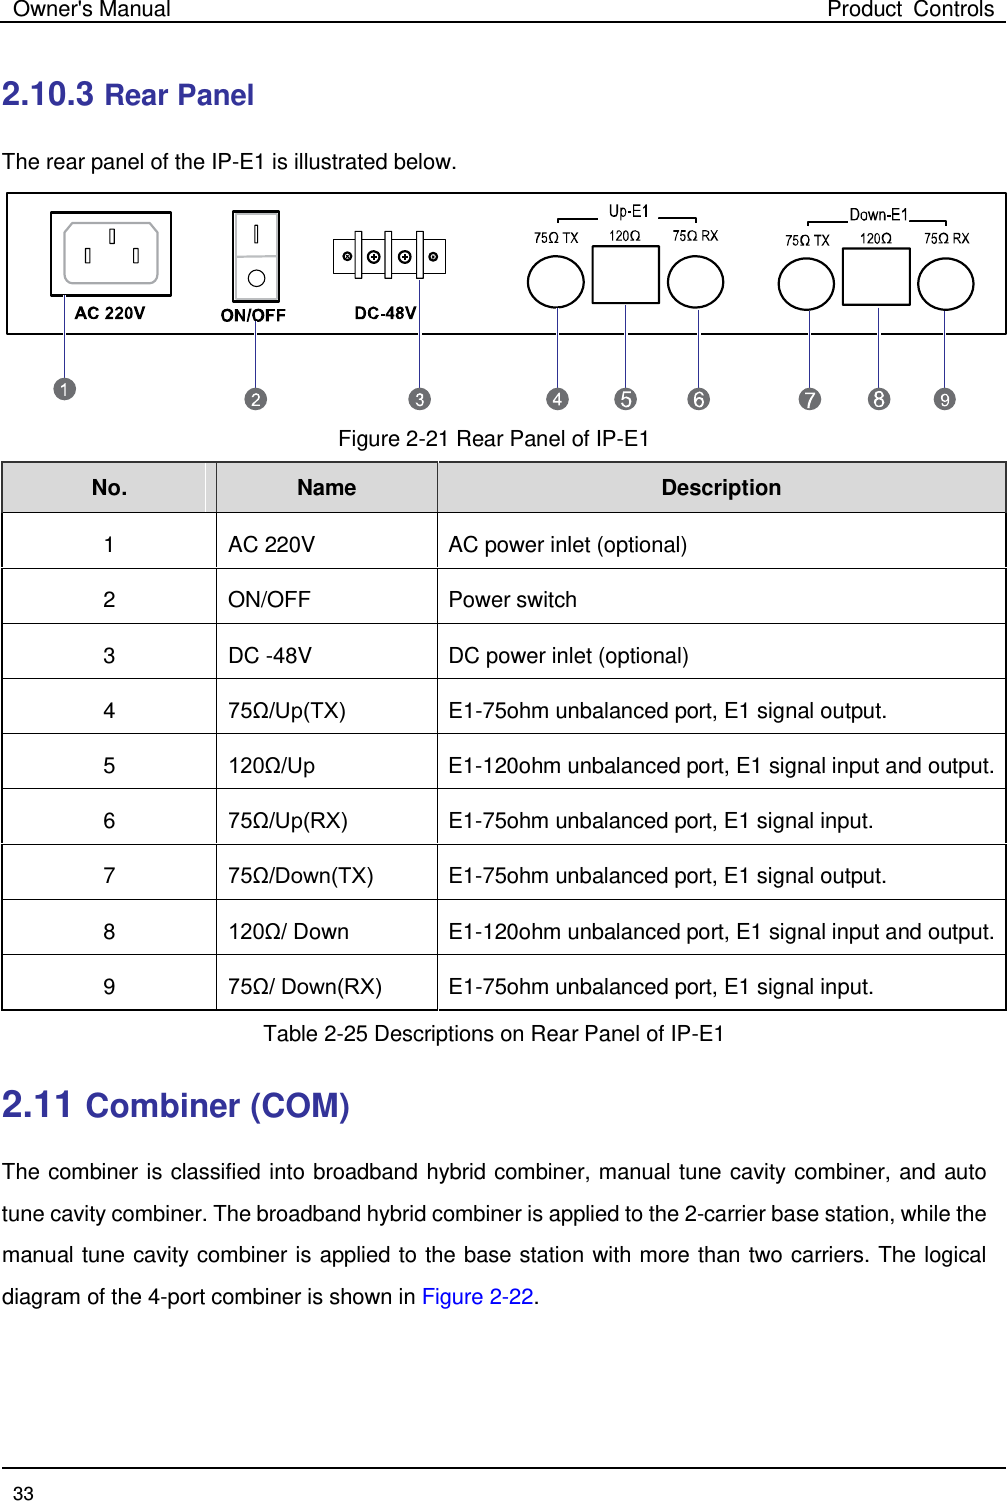 Owner&apos;s Manual Product Controls  33  2.10.3 Rear Panel The rear panel of the IP-E1 is illustrated below.    Figure 2-21 Rear Panel of IP-E1 No. Name   Description   1  AC 220V AC power inlet (optional) 2  ON/OFF Power switch 3  DC -48V DC power inlet (optional) 4  75Ω/Up(TX) E1-75ohm unbalanced port, E1 signal output.     5  120Ω/Up E1-120ohm unbalanced port, E1 signal input and output.   6  75Ω/Up(RX) E1-75ohm unbalanced port, E1 signal input.     7  75Ω/Down(TX) E1-75ohm unbalanced port, E1 signal output.     8  120Ω/ Down E1-120ohm unbalanced port, E1 signal input and output.   9  75Ω/ Down(RX) E1-75ohm unbalanced port, E1 signal input.     Table 2-25 Descriptions on Rear Panel of IP-E1 2.11 Combiner (COM) The combiner is classified into broadband hybrid combiner, manual tune cavity combiner, and auto tune cavity combiner. The broadband hybrid combiner is applied to the 2-carrier base station, while the manual tune cavity combiner is applied to the base station with more than two carriers. The logical diagram of the 4-port combiner is shown in Figure 2-22. 